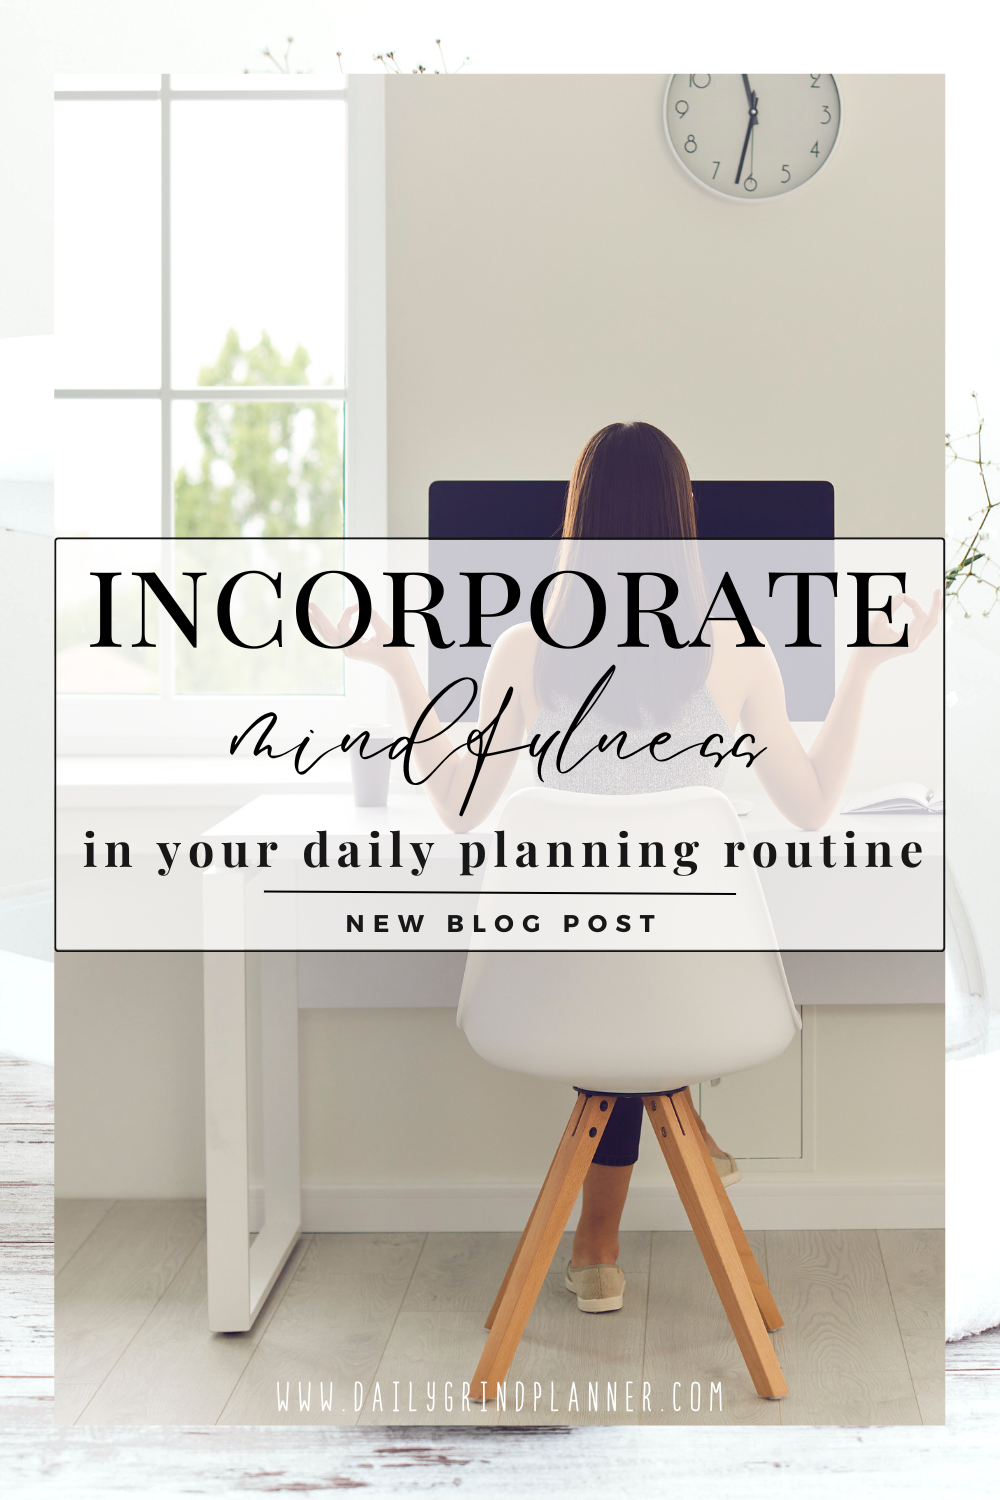 Incorporate Mindfulness in Your Daily Planning Routine